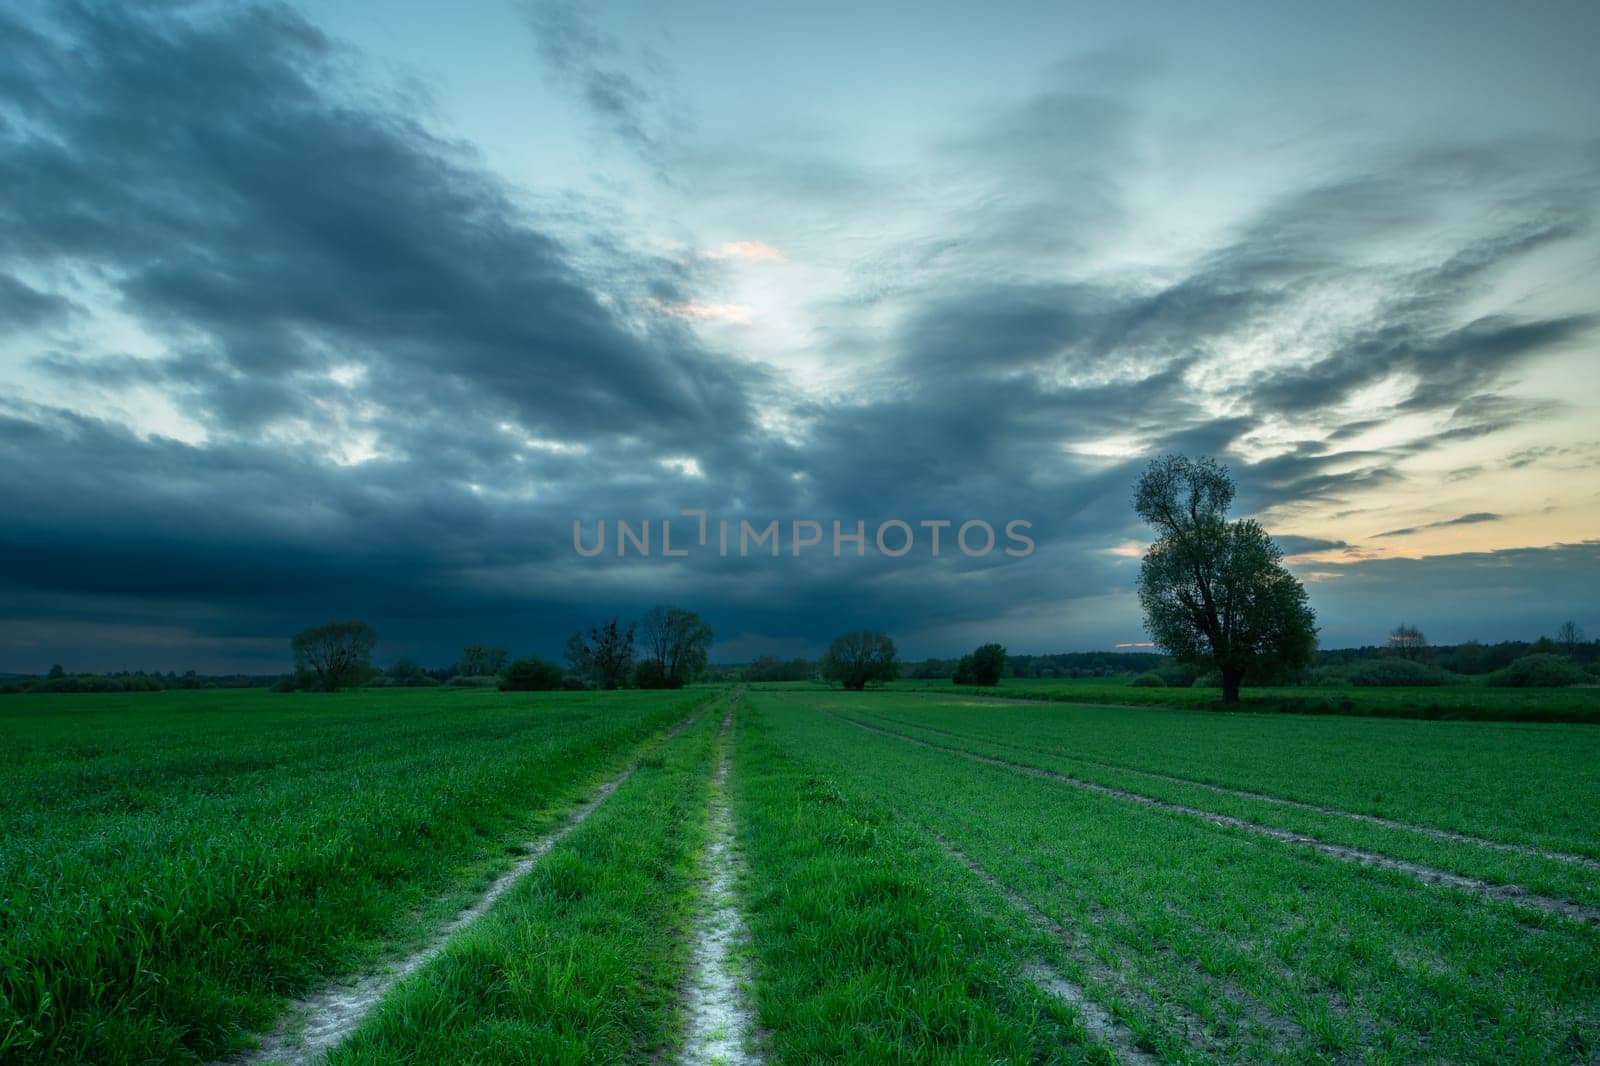 Dirt road through green fields and a front with dark clouds, Nowiny, Poland